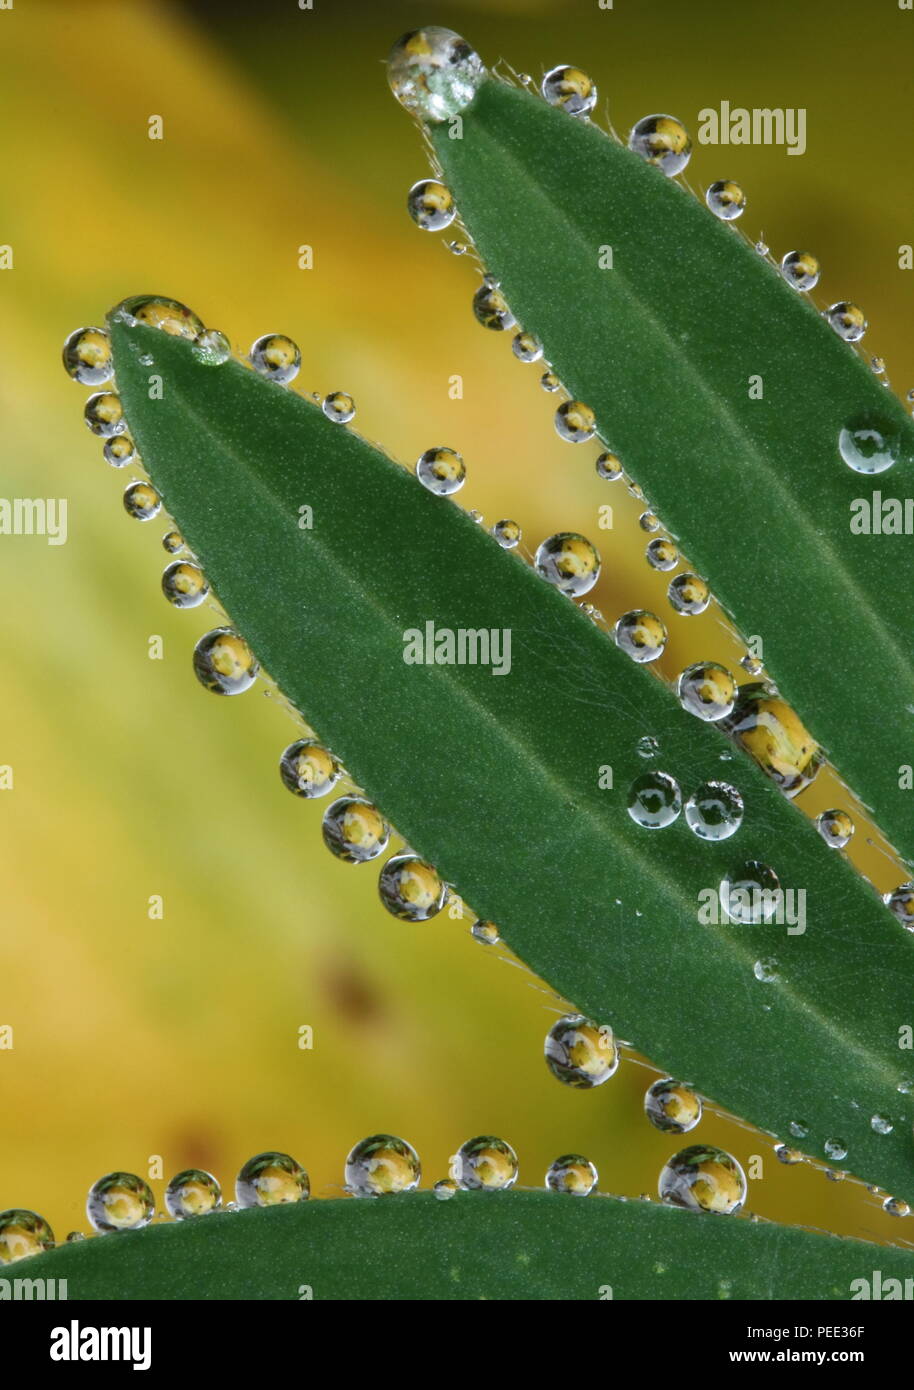 Leaves of lupin plant covered in rain droplets Stock Photo